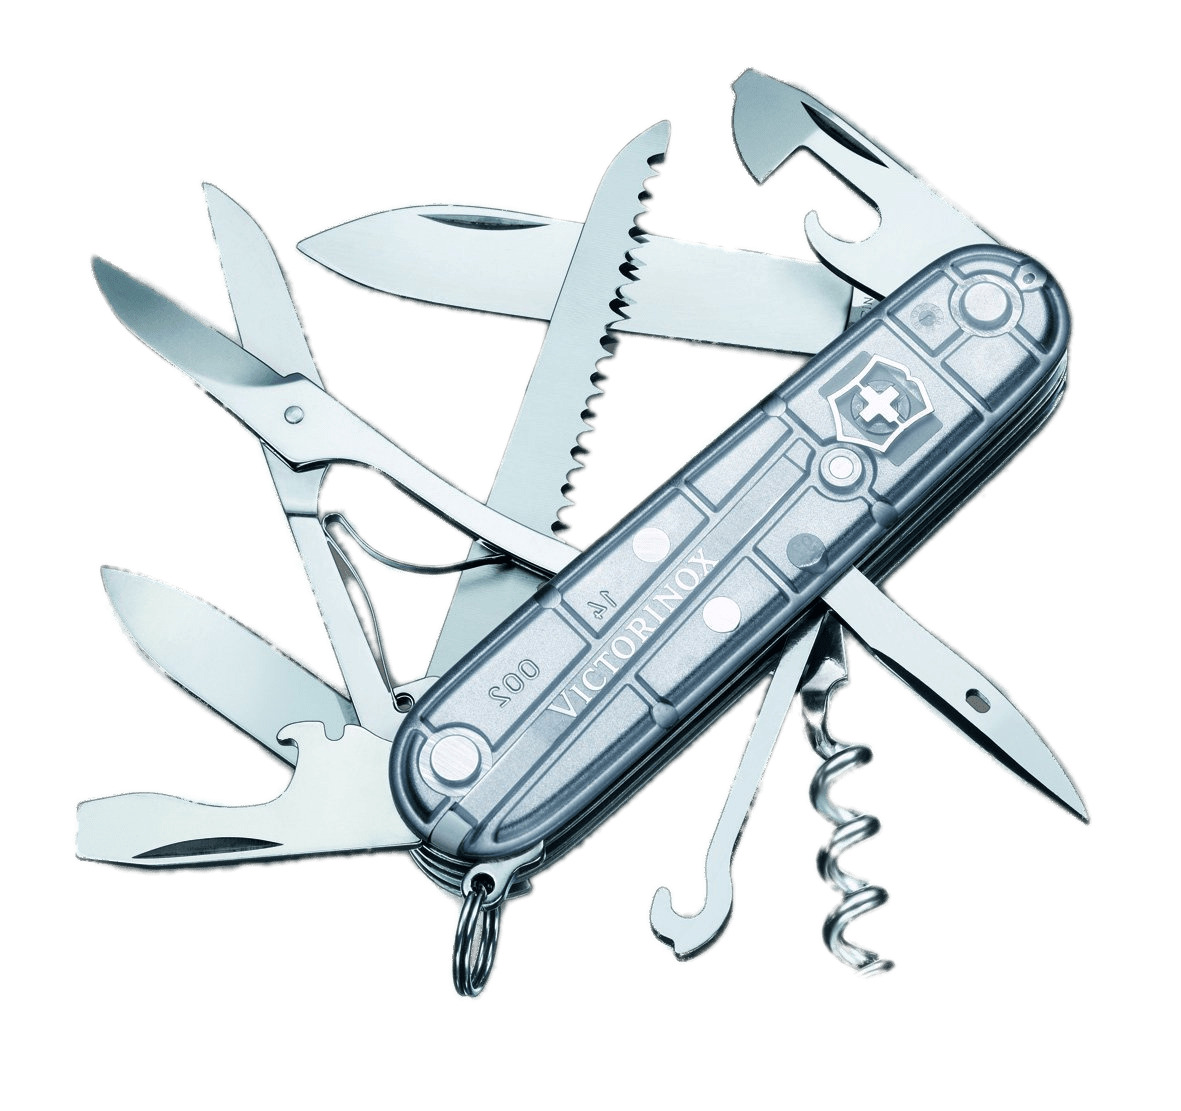 Victorinox Silvertech Swiss Army Knife png icons